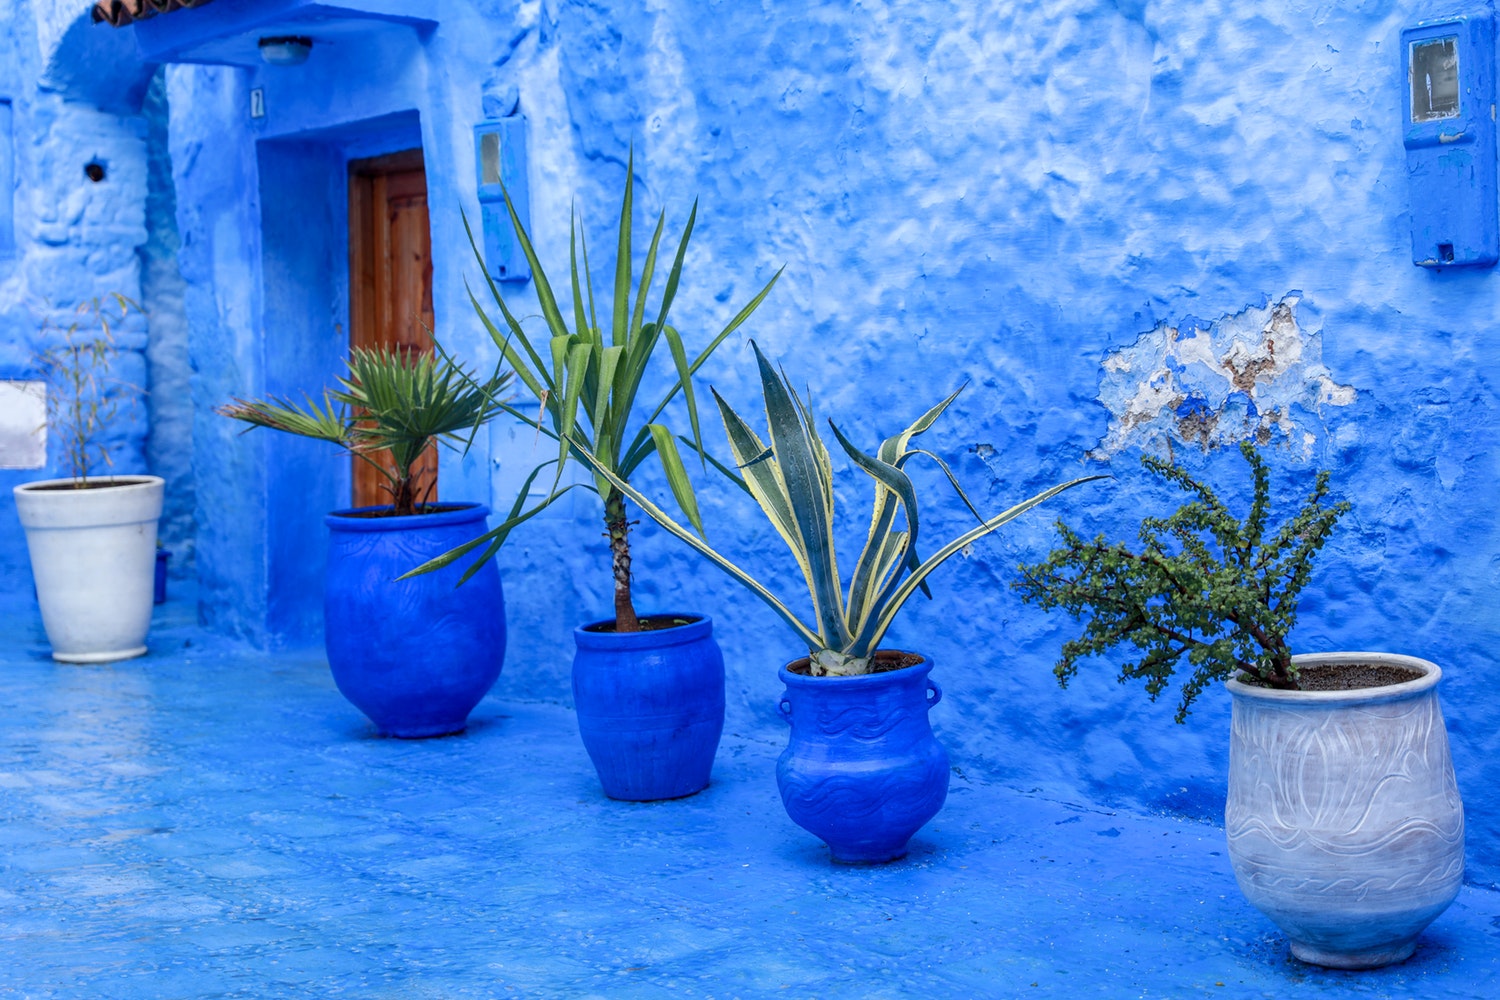 Chefchaouen, The Blue Pearl of Morocco